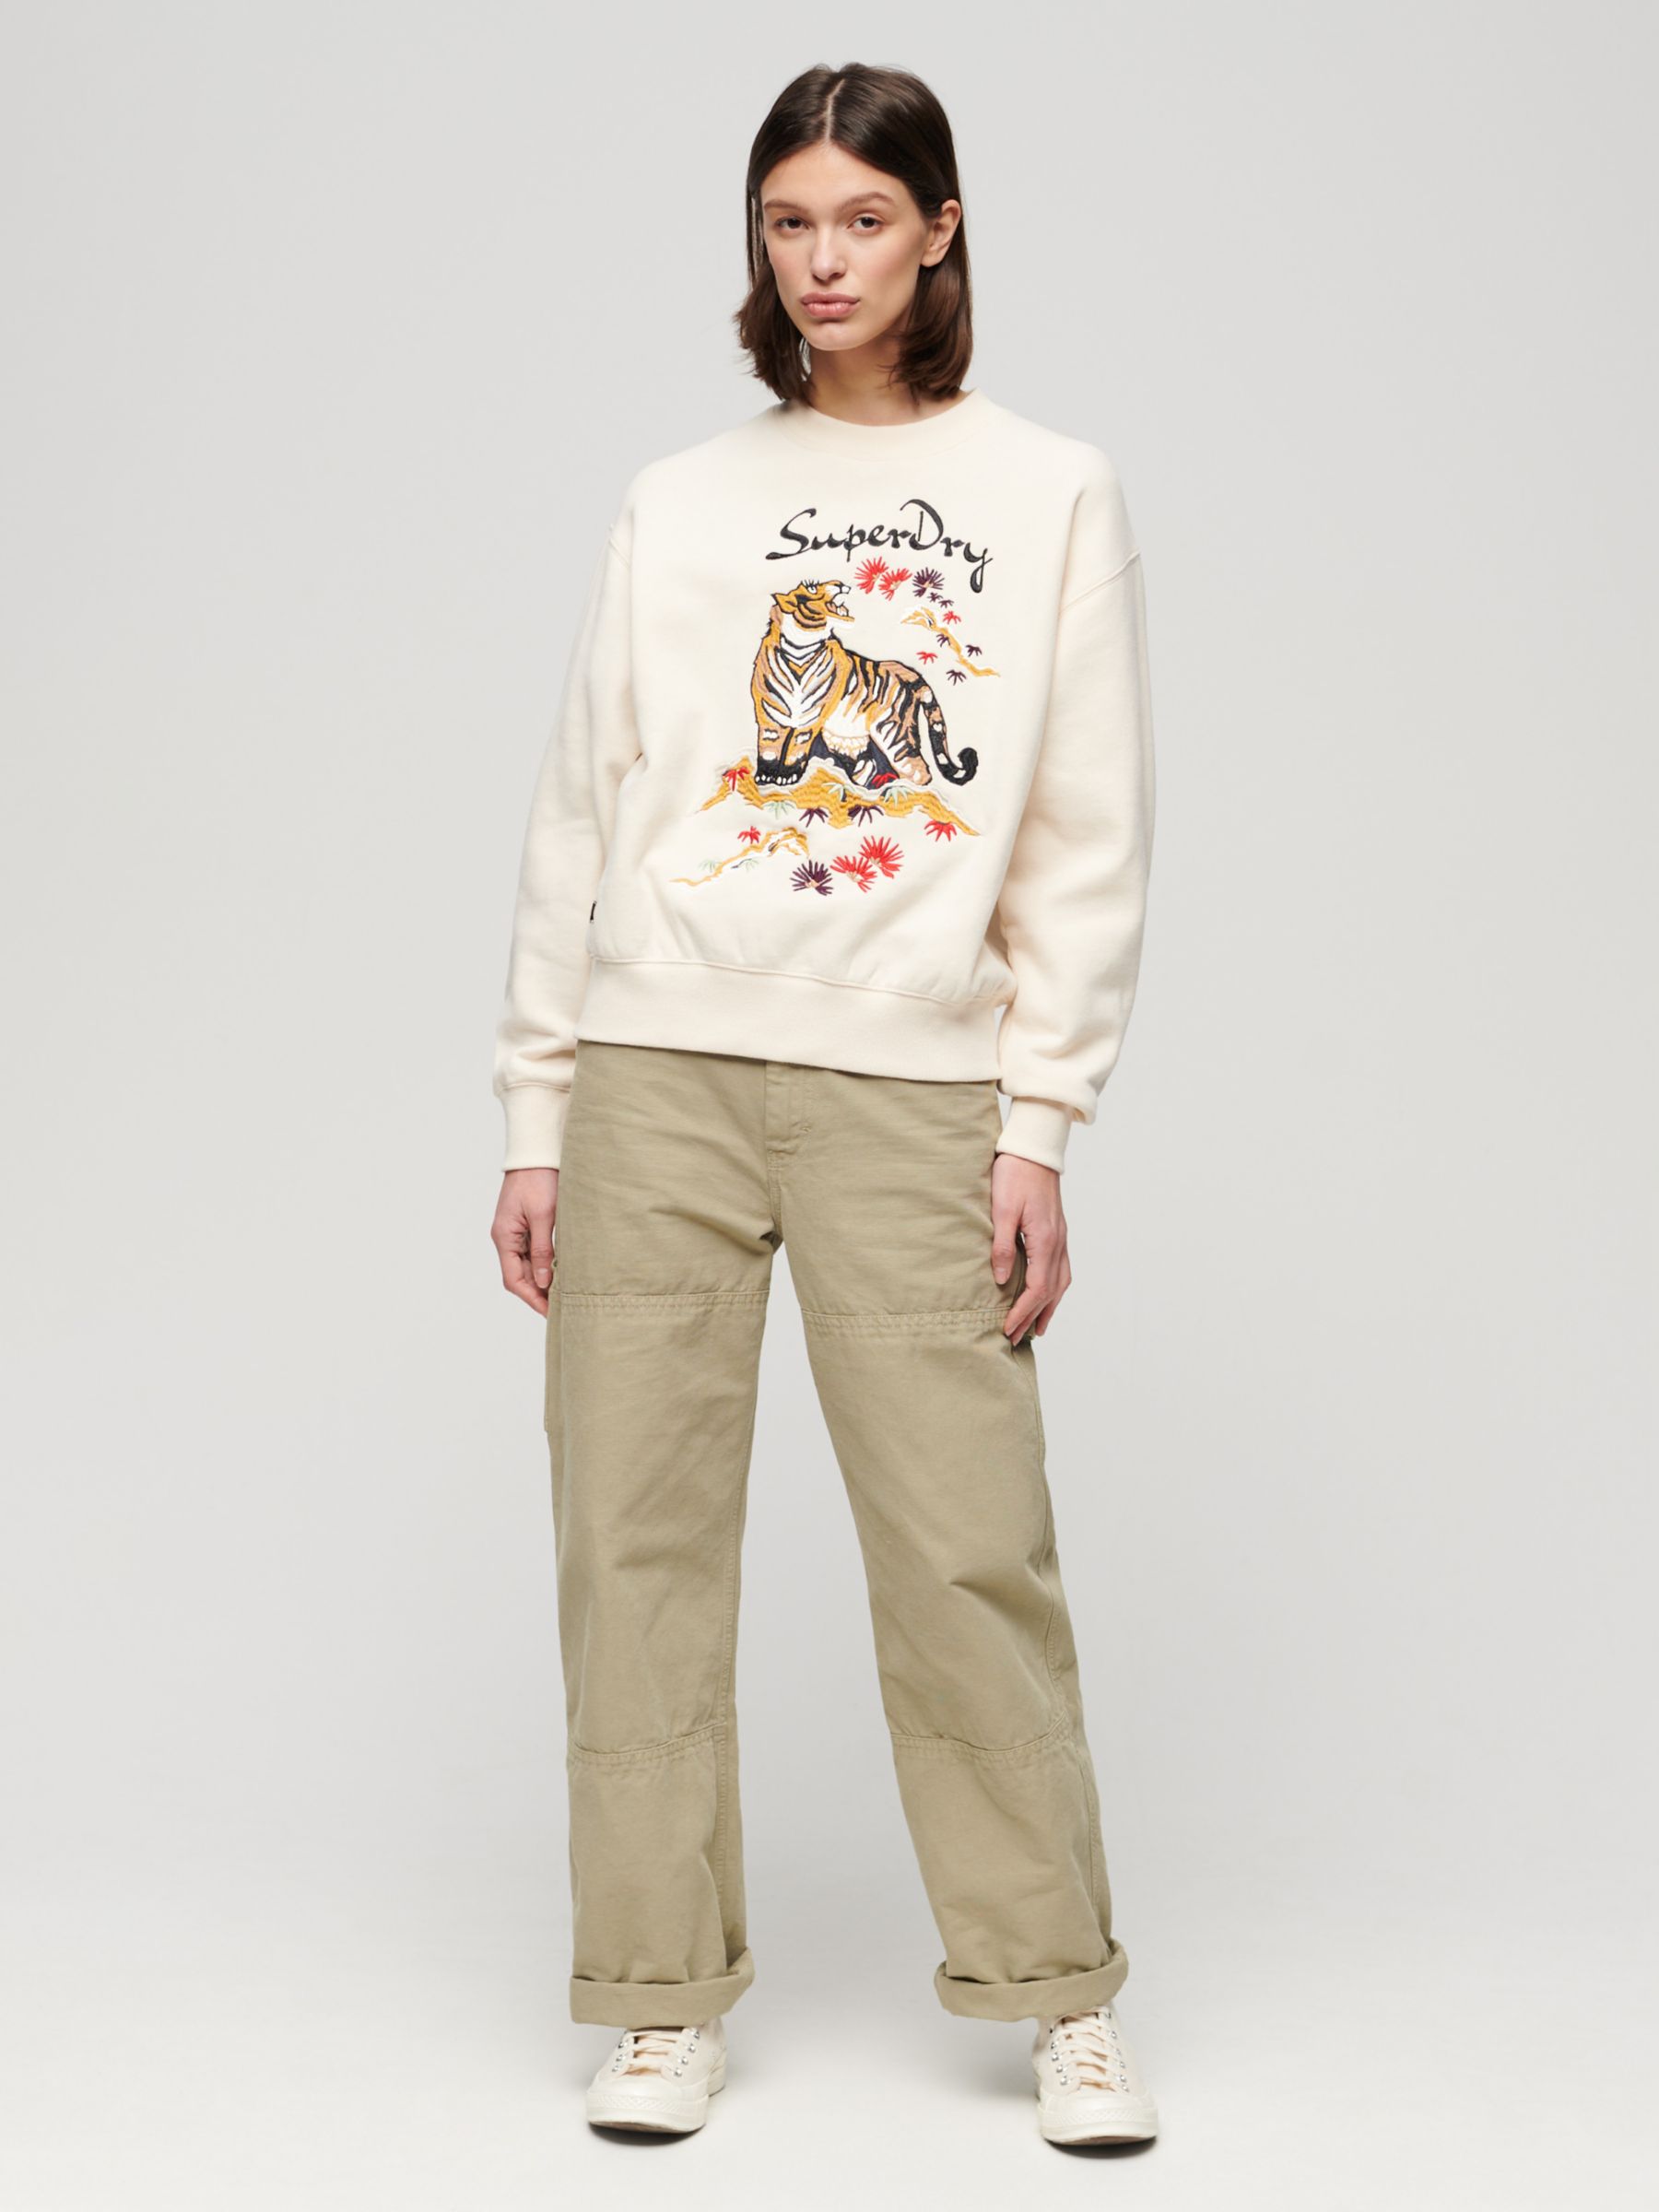 Buy Superdry Suika Embroidered Top, Oatmeal Beige Online at johnlewis.com